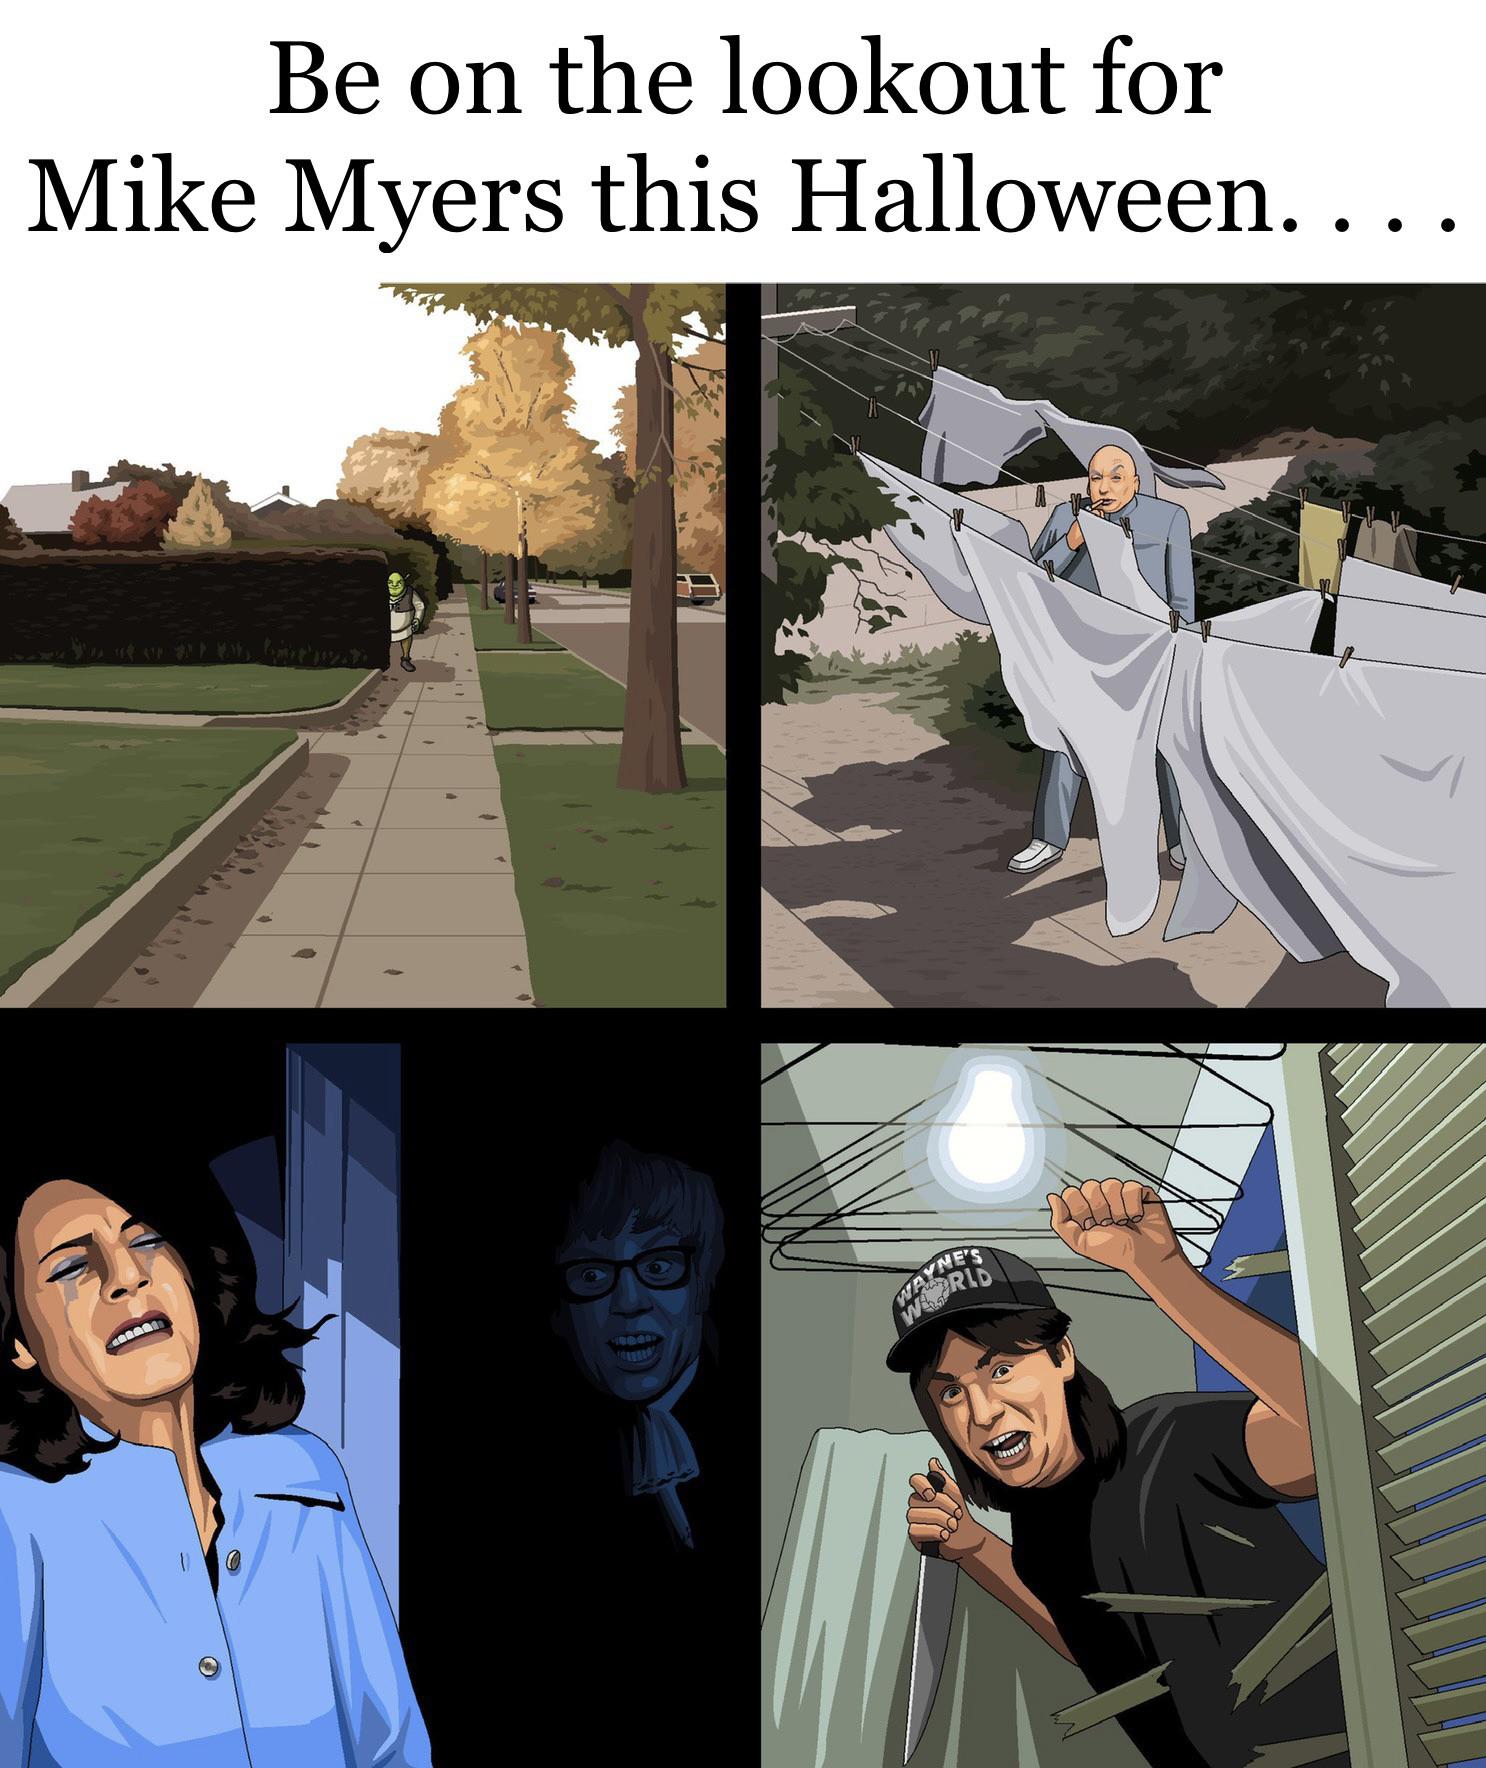 mike myers michael myers - Be on the lookout for Mike Myers this Halloween.... Wa Ne'S Bm dows